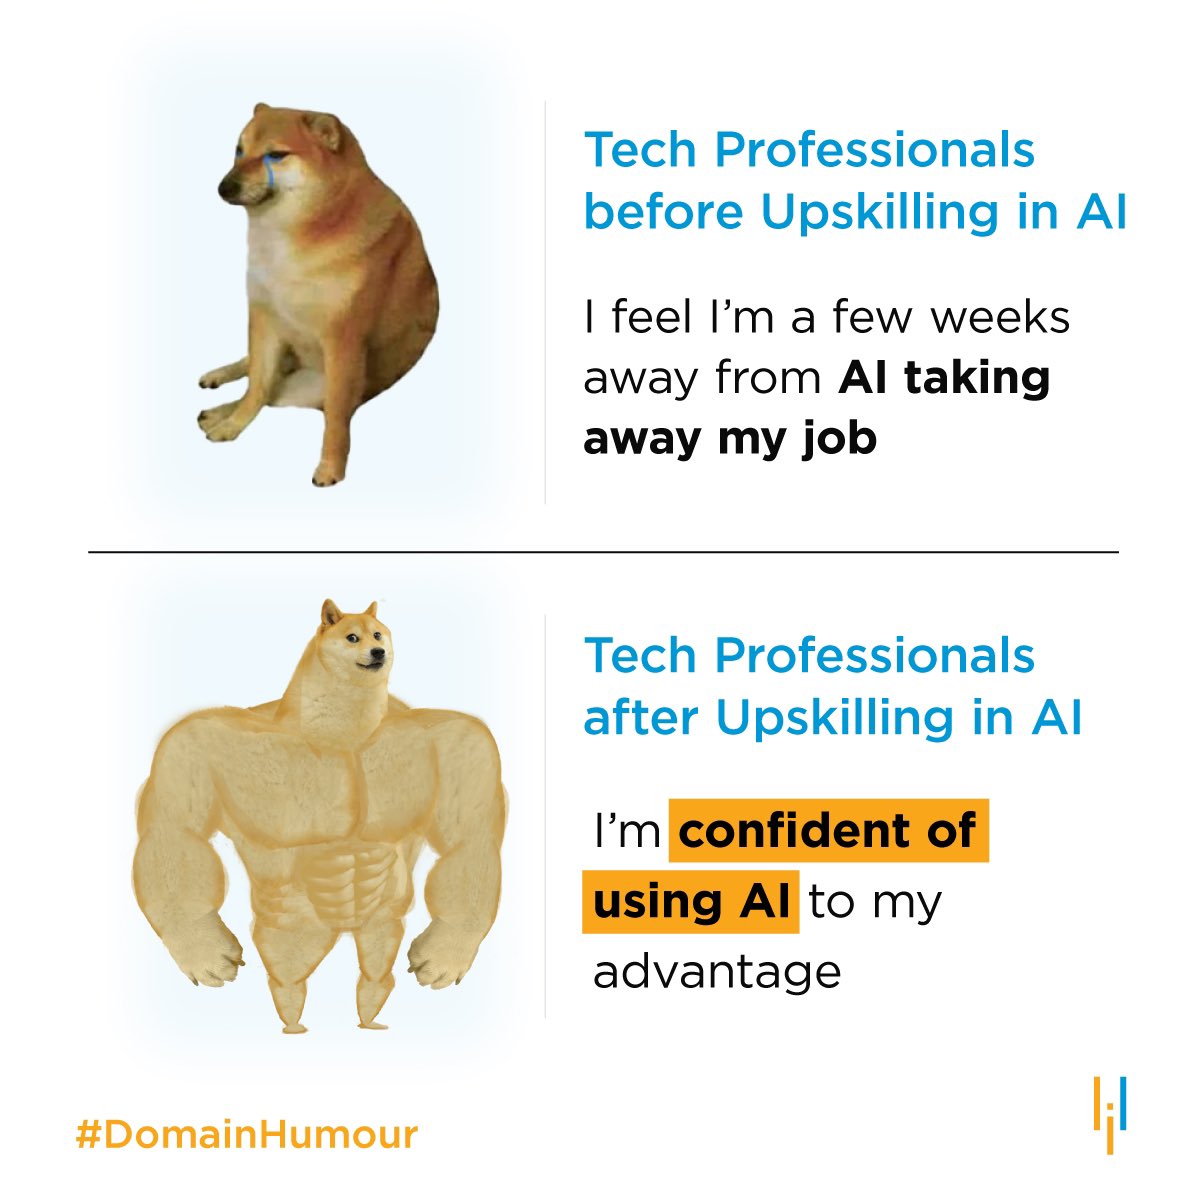 AI is an enabler or challenger? What do you think?